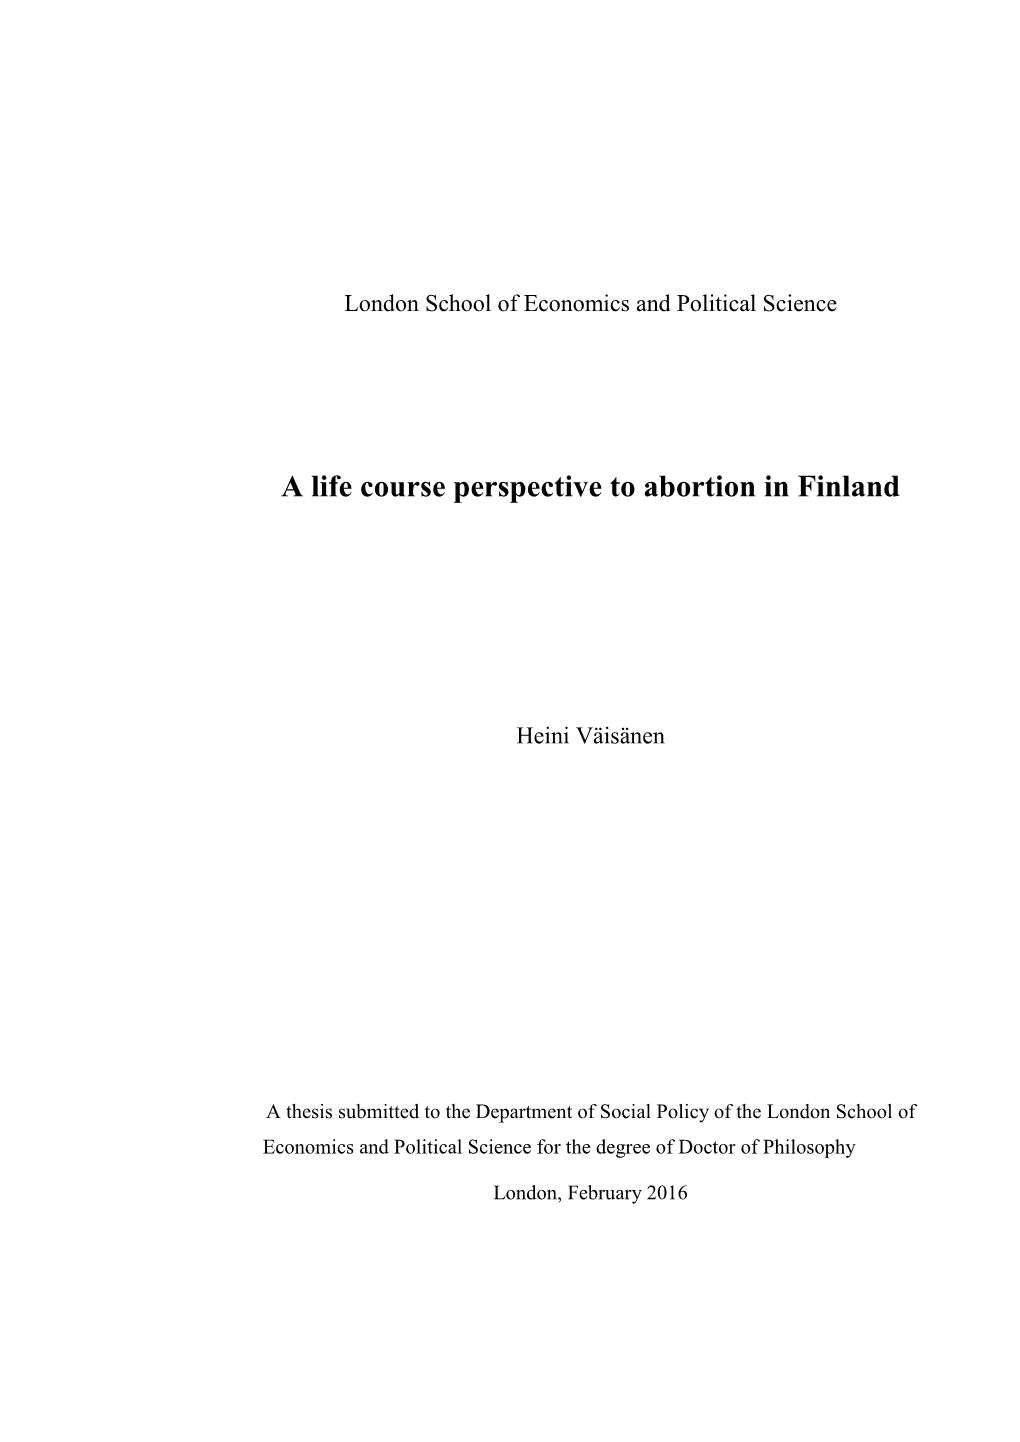 A Life Course Perspective to Abortion in Finland